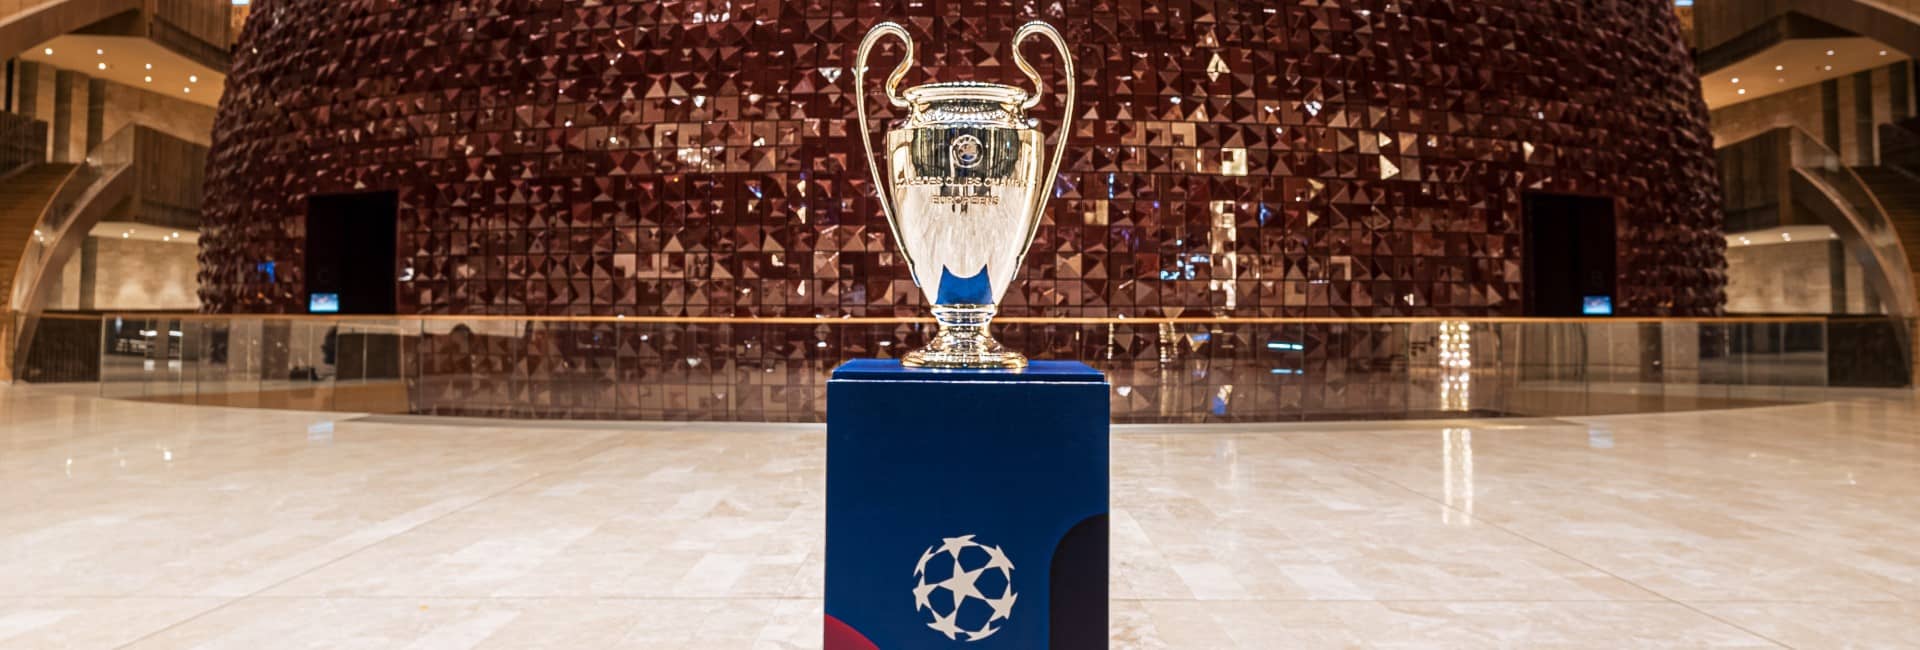 5 Reasons to Visit İstanbul for the UEFA Champions League Final